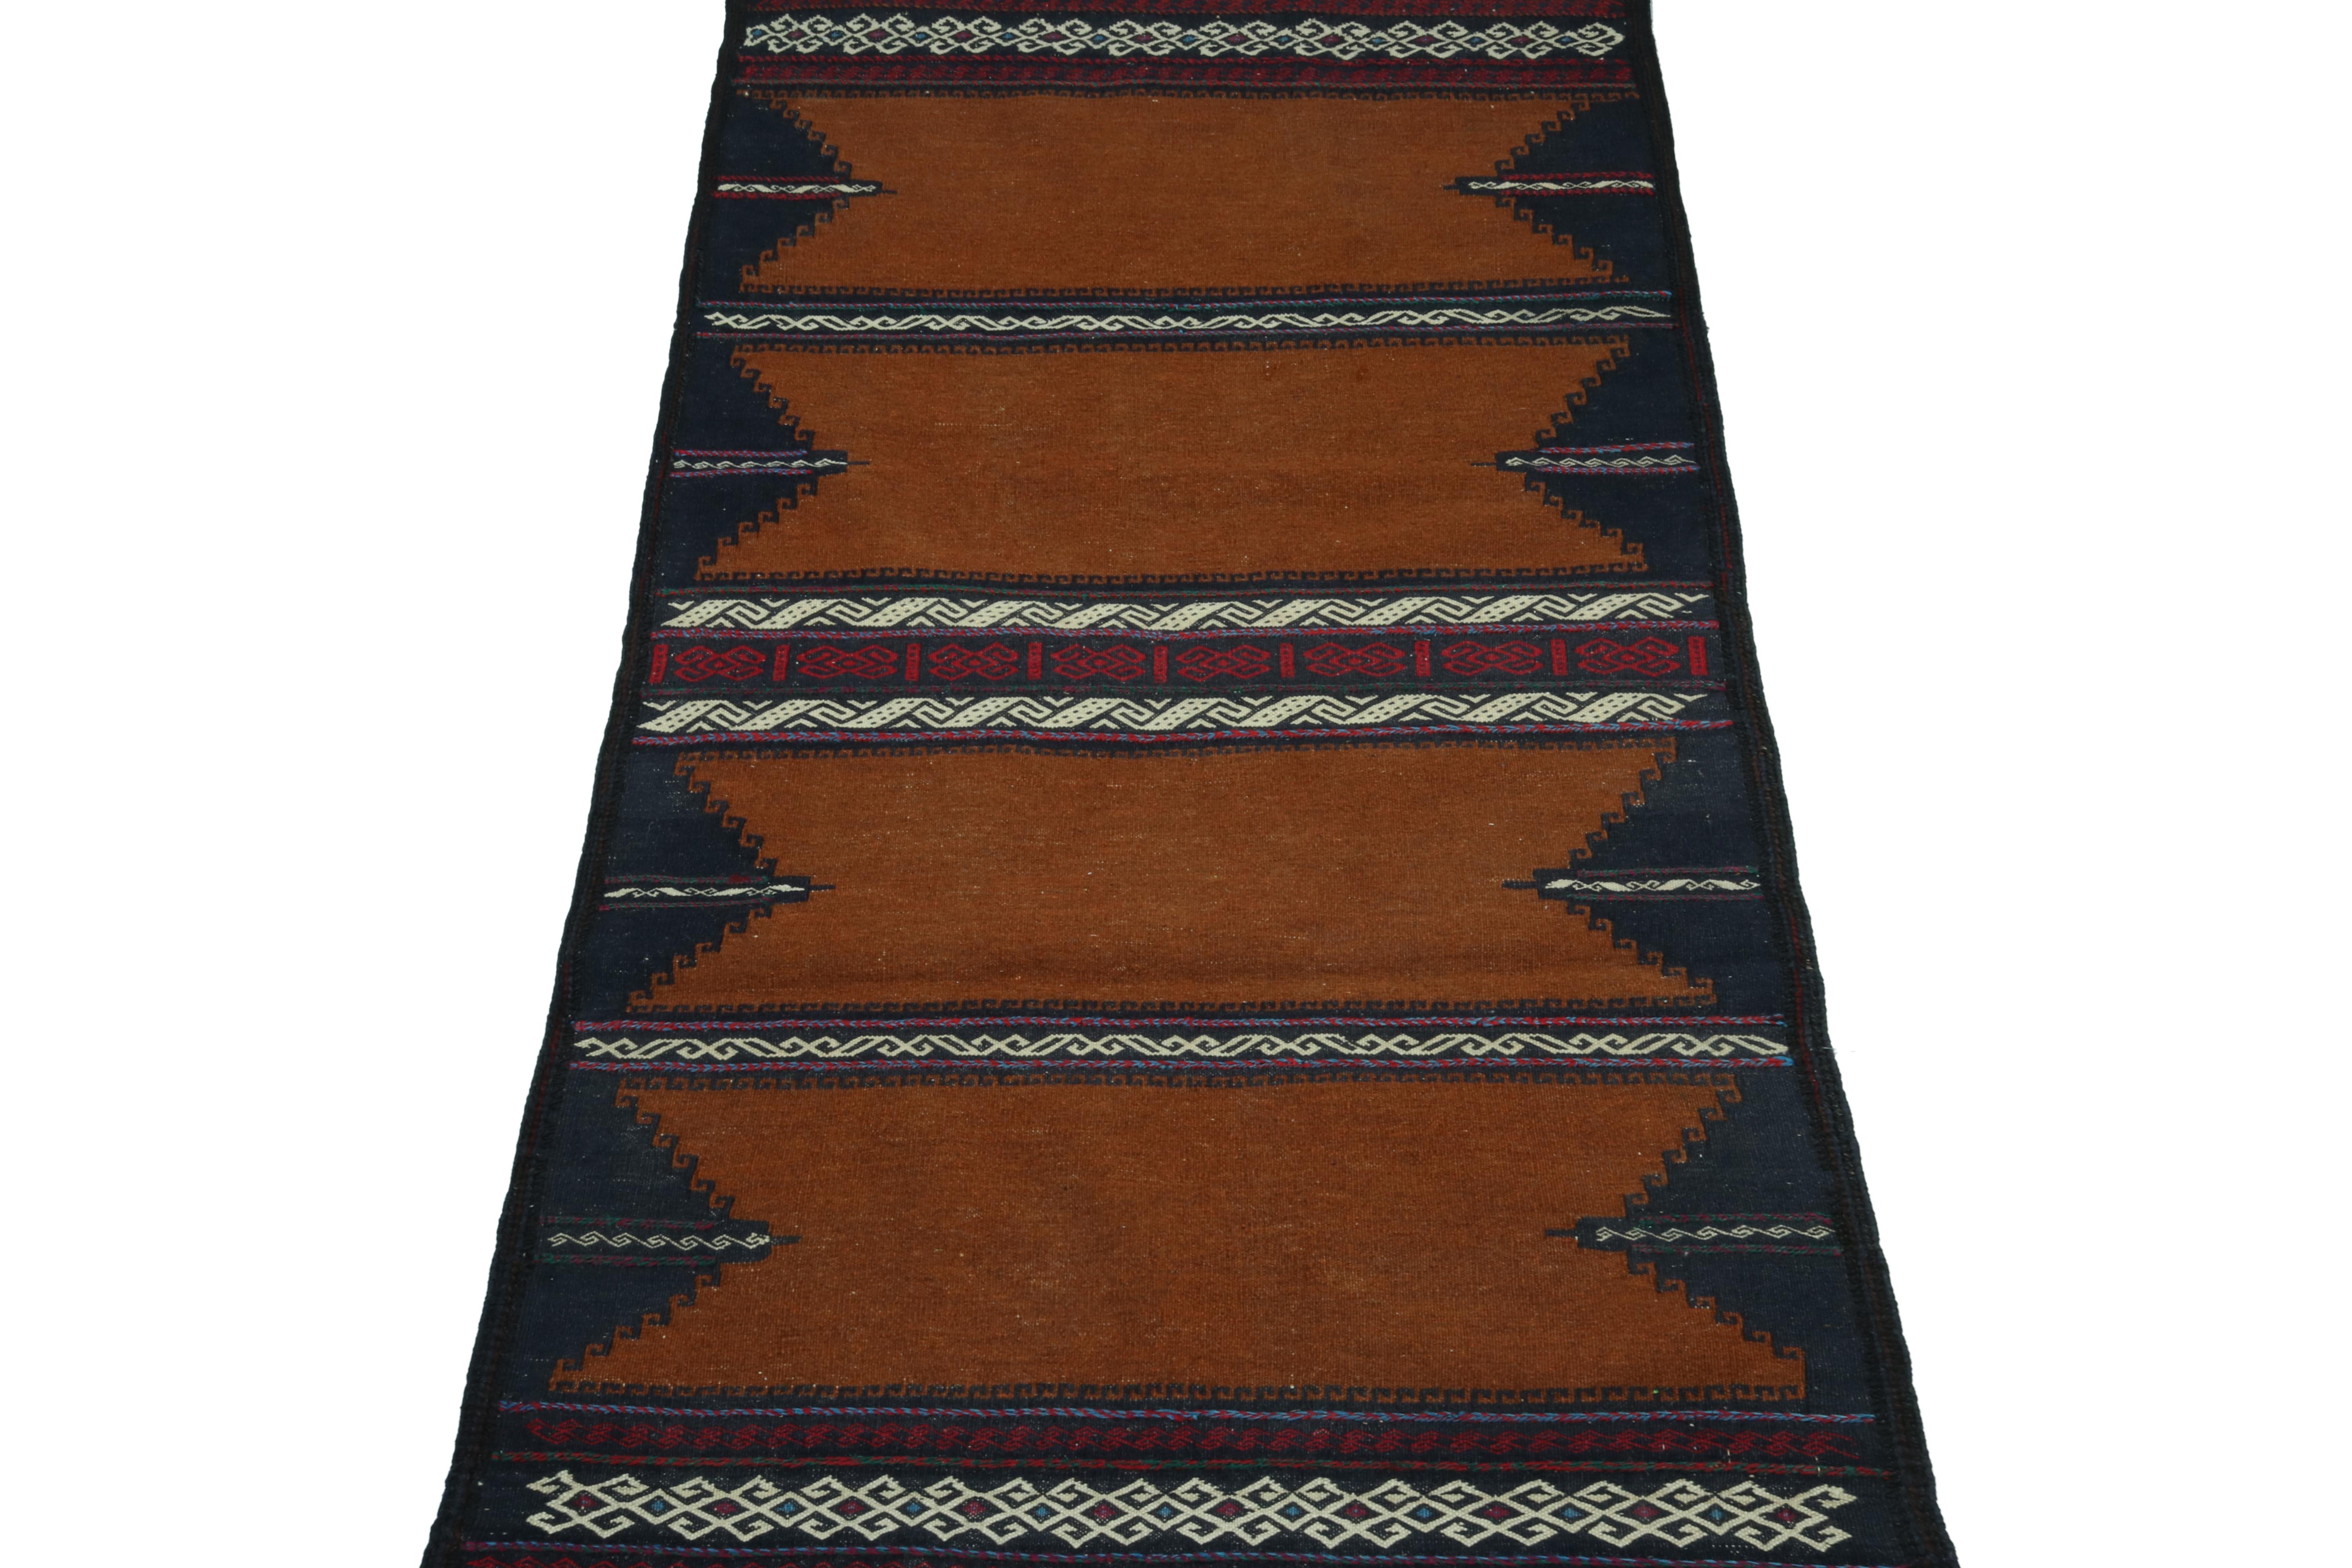 This vintage 3x4 Persian Kilim is a tribal rug of Sofreh provenance—handwoven in wool circa 1970-1980.

Further on the Design:

This piece employs an open field style in rich chocolate brown and rust colors, as well as vibrant geometric patterns